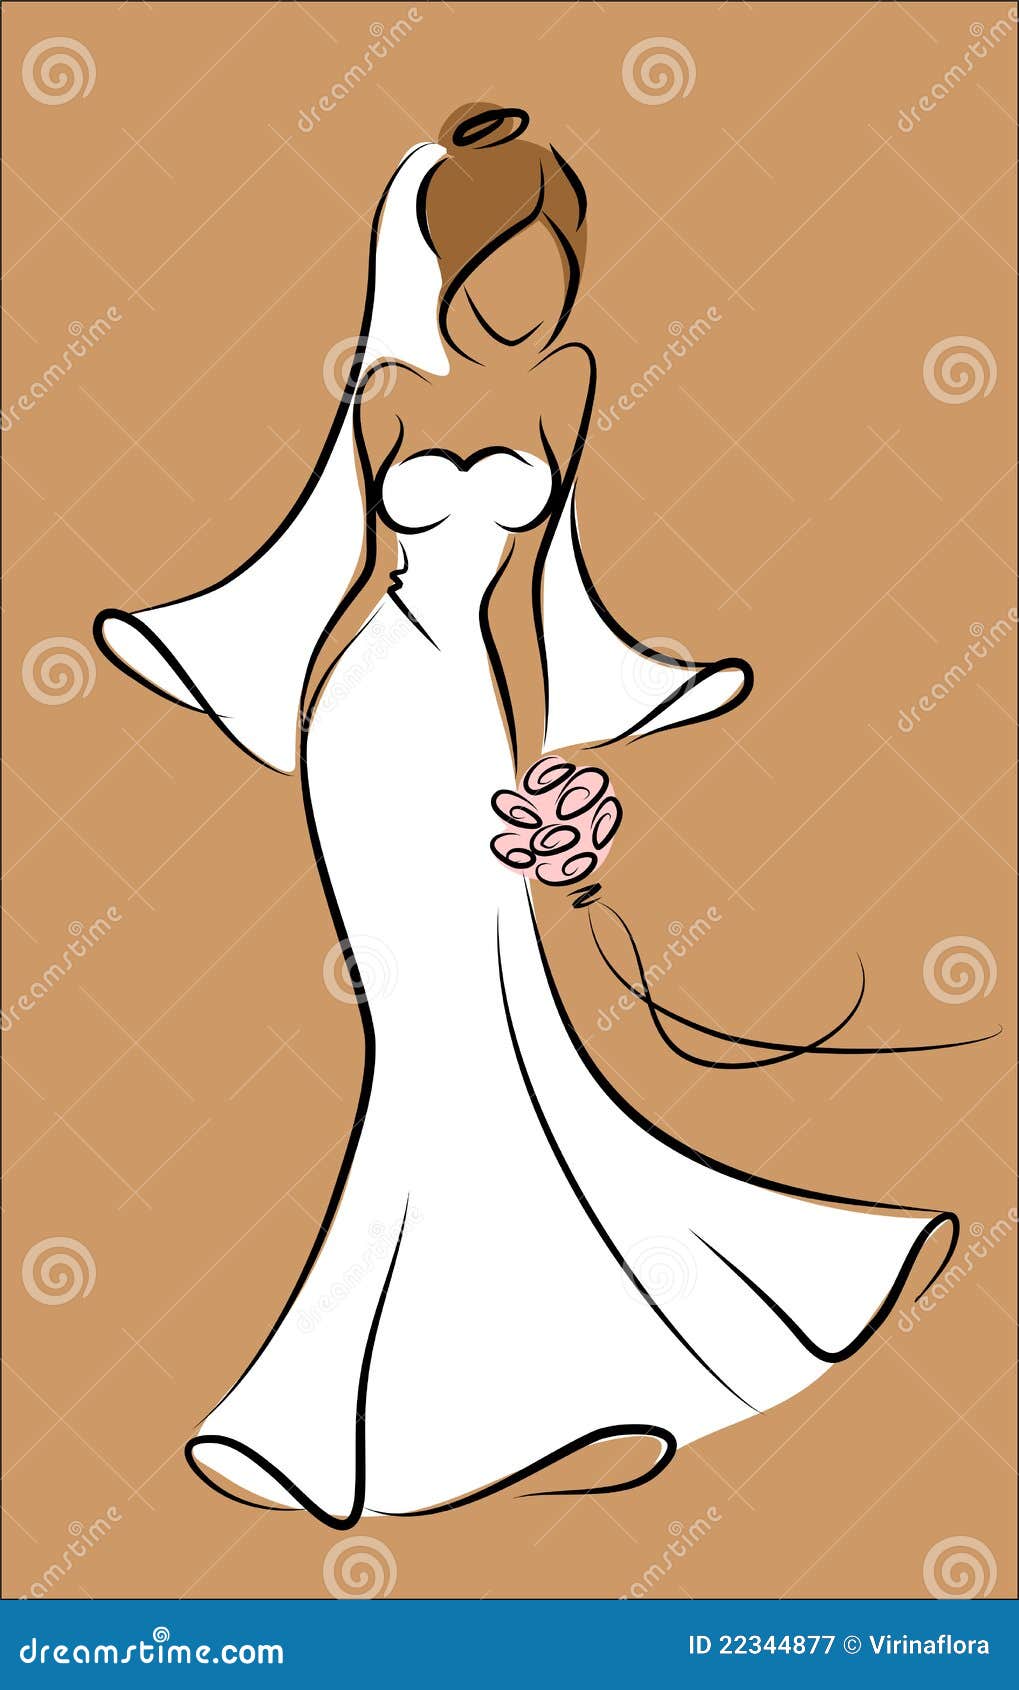 Download Silhouette Of A Bride In A Wedding Dress,vector Stock ...